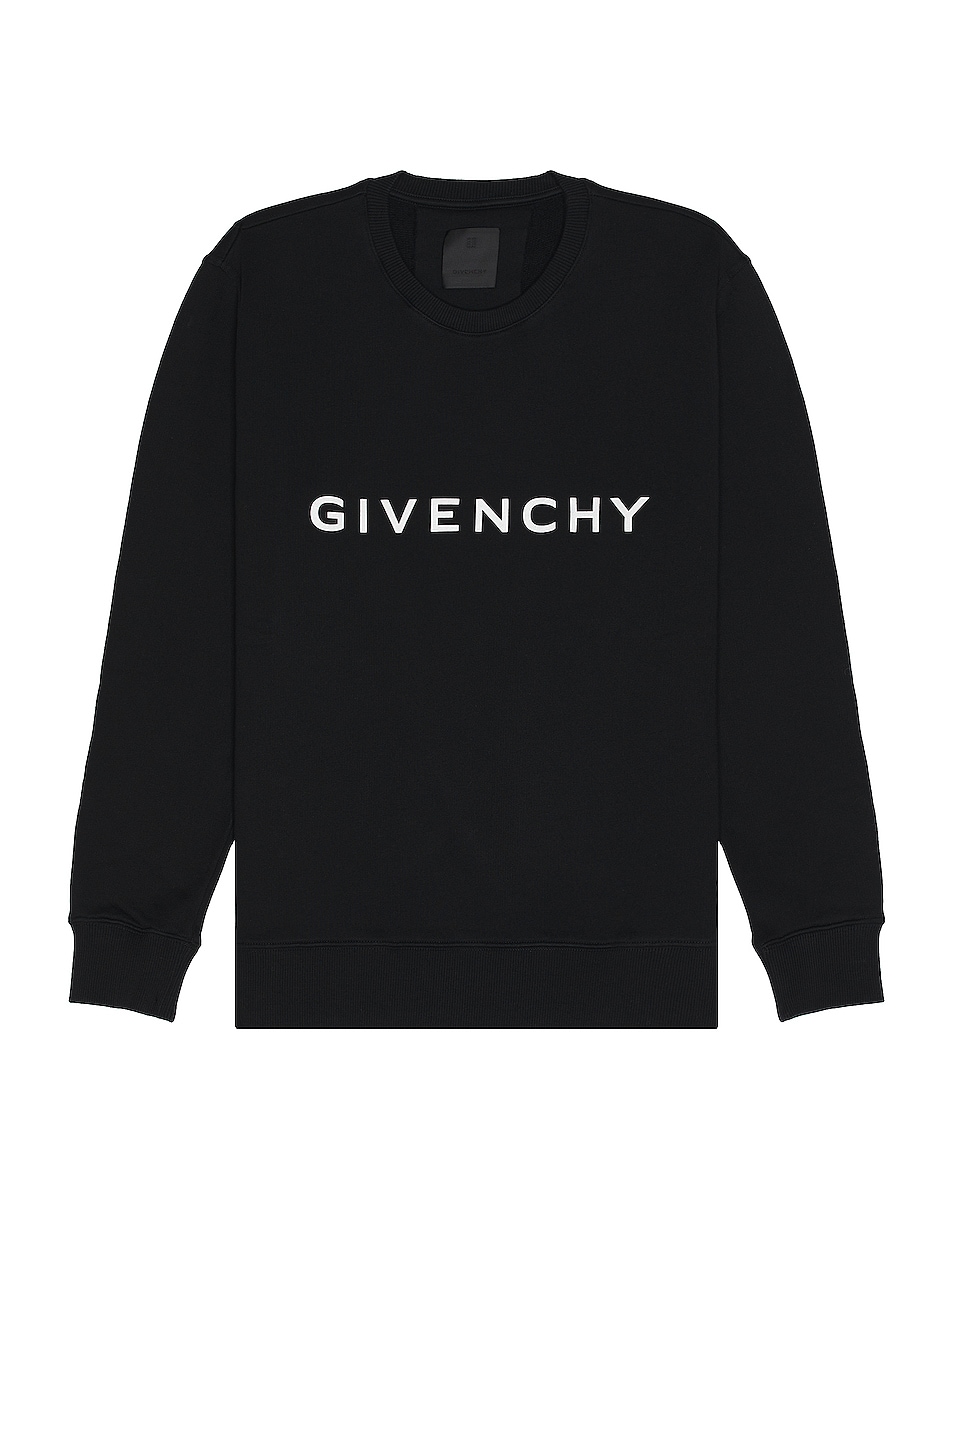 Image 1 of Givenchy Slim Fit Sweatshirt in Black